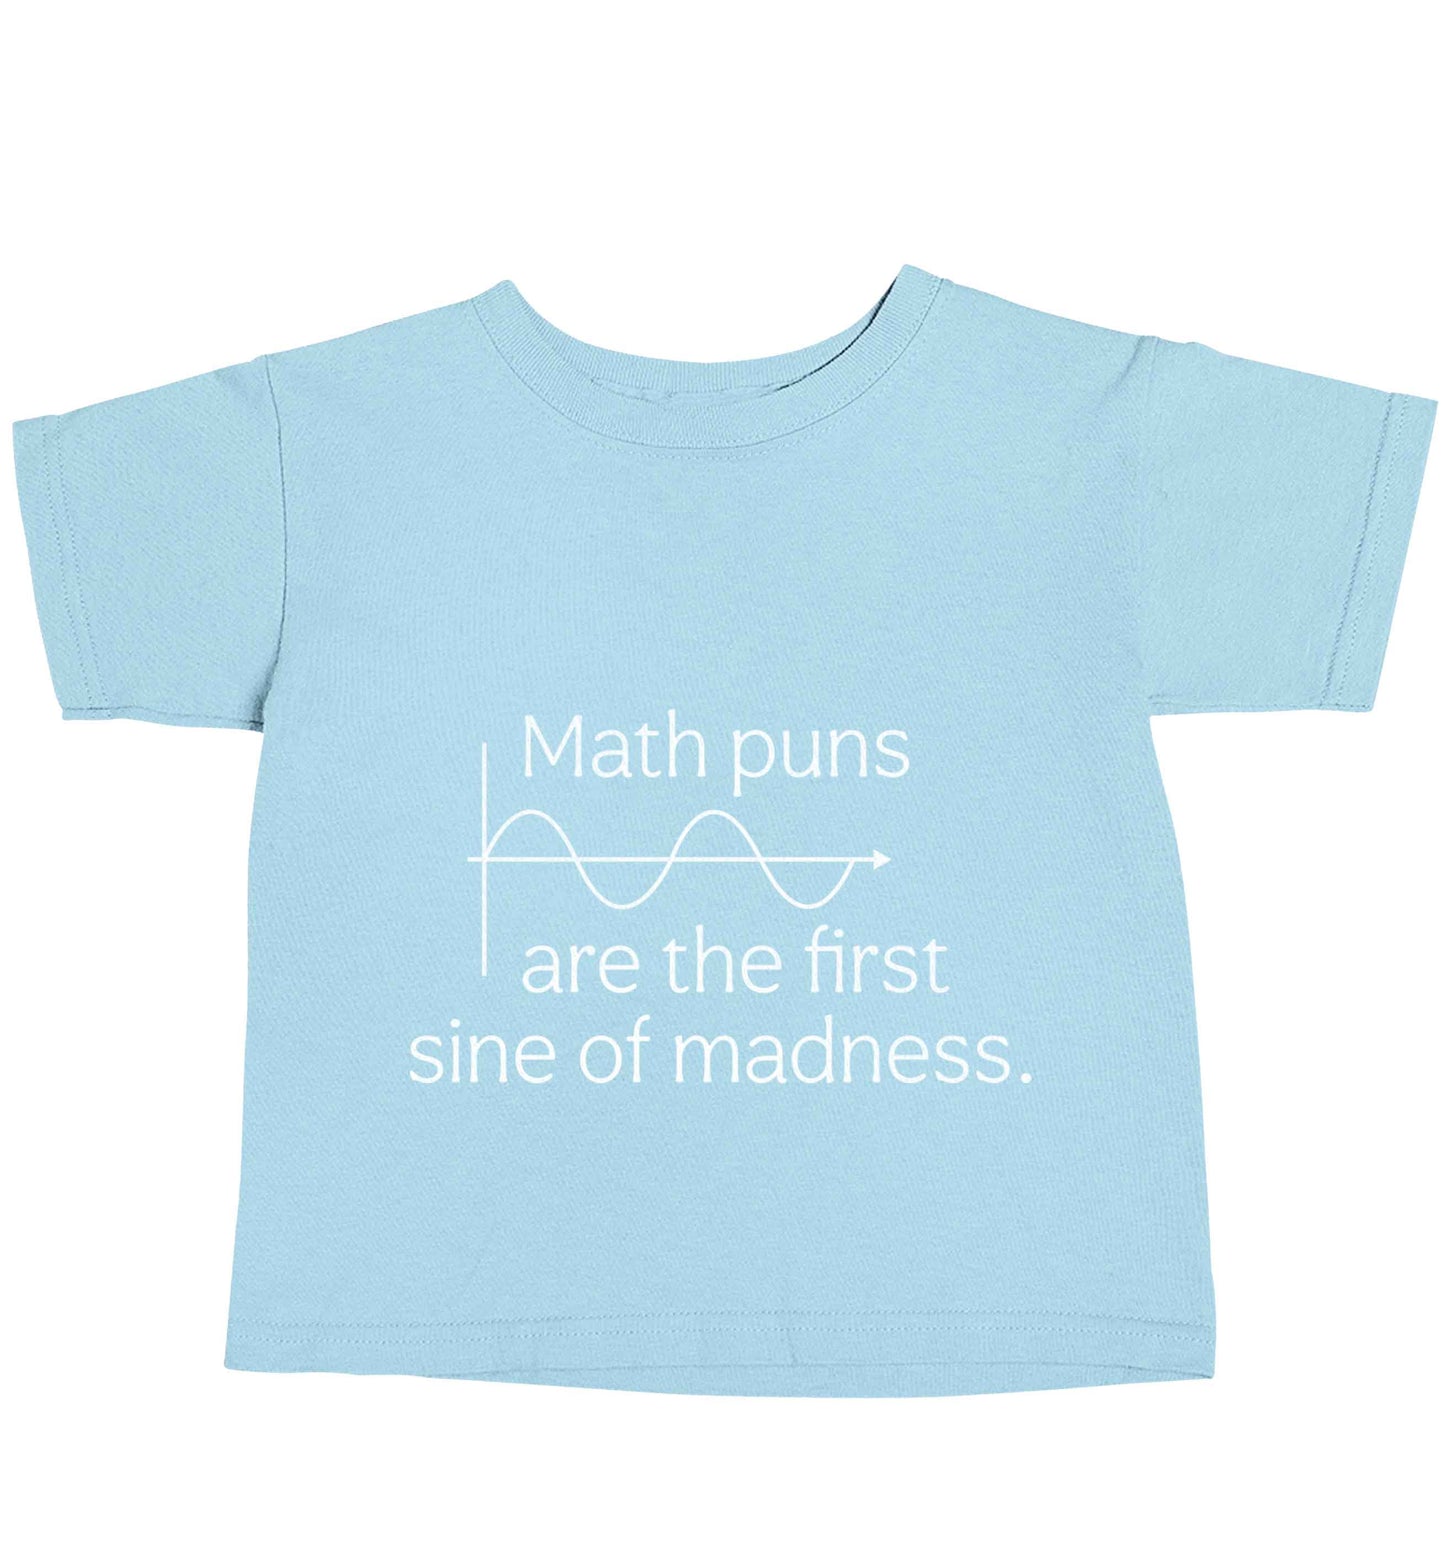 Math puns are the first sine of madness light blue baby toddler Tshirt 2 Years